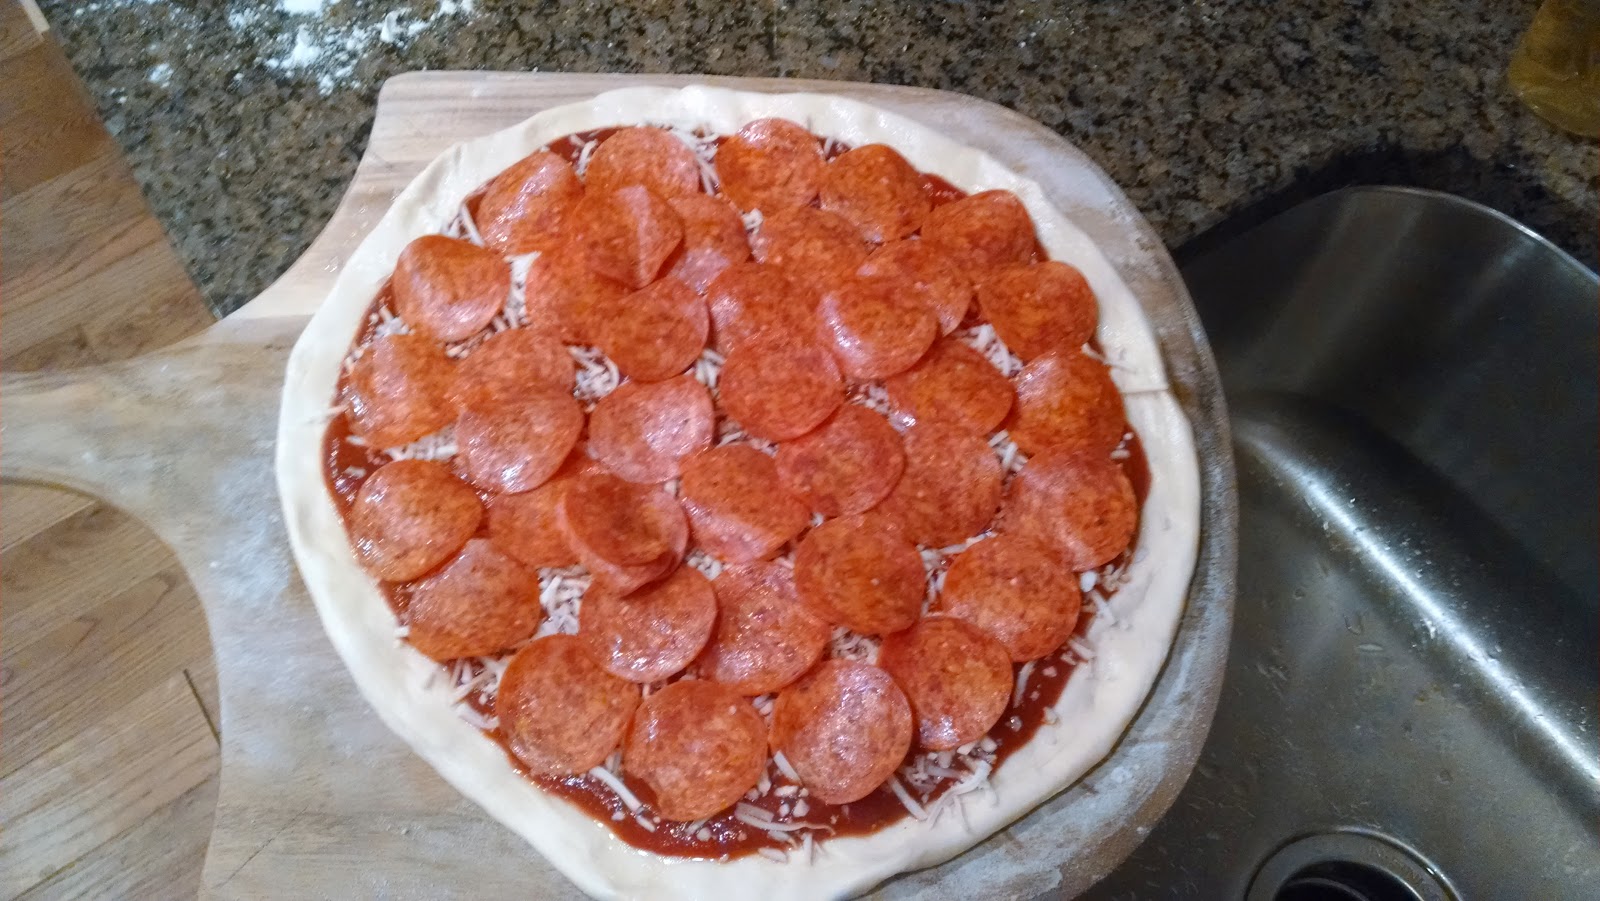 Pizza Pie before oven